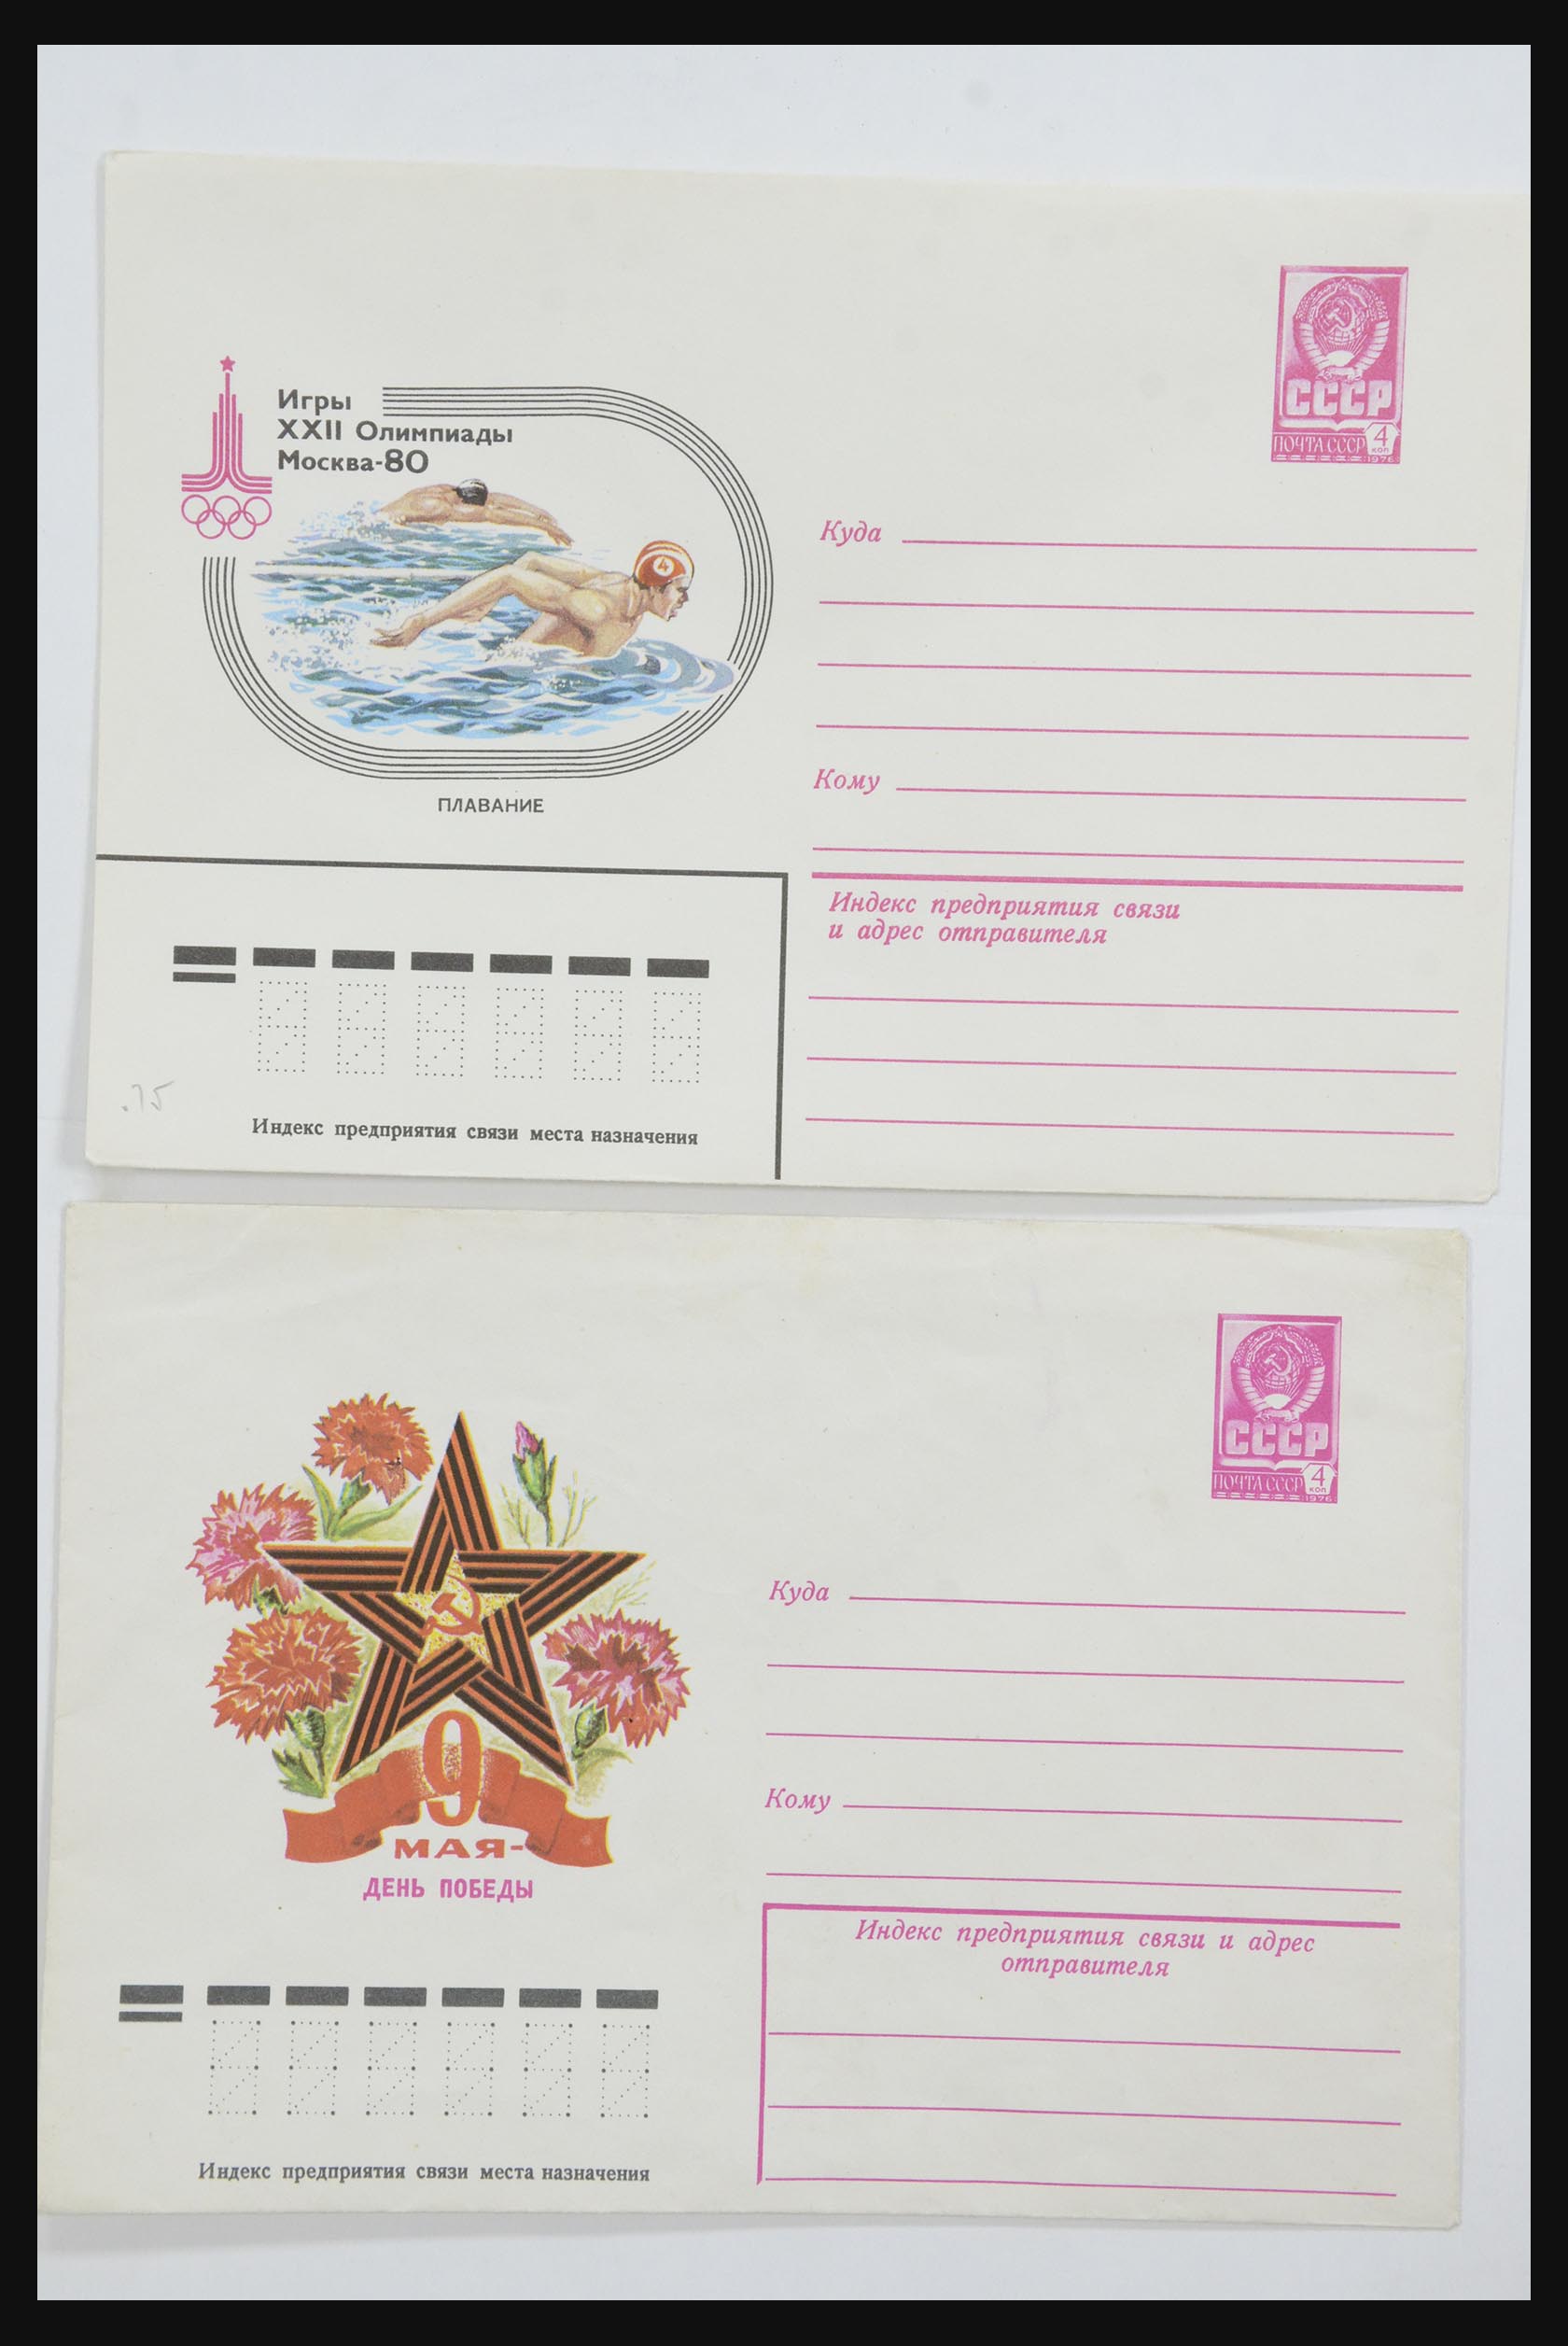 31928 0072 - 31928 Eastern Europe covers 1960's-1990's.